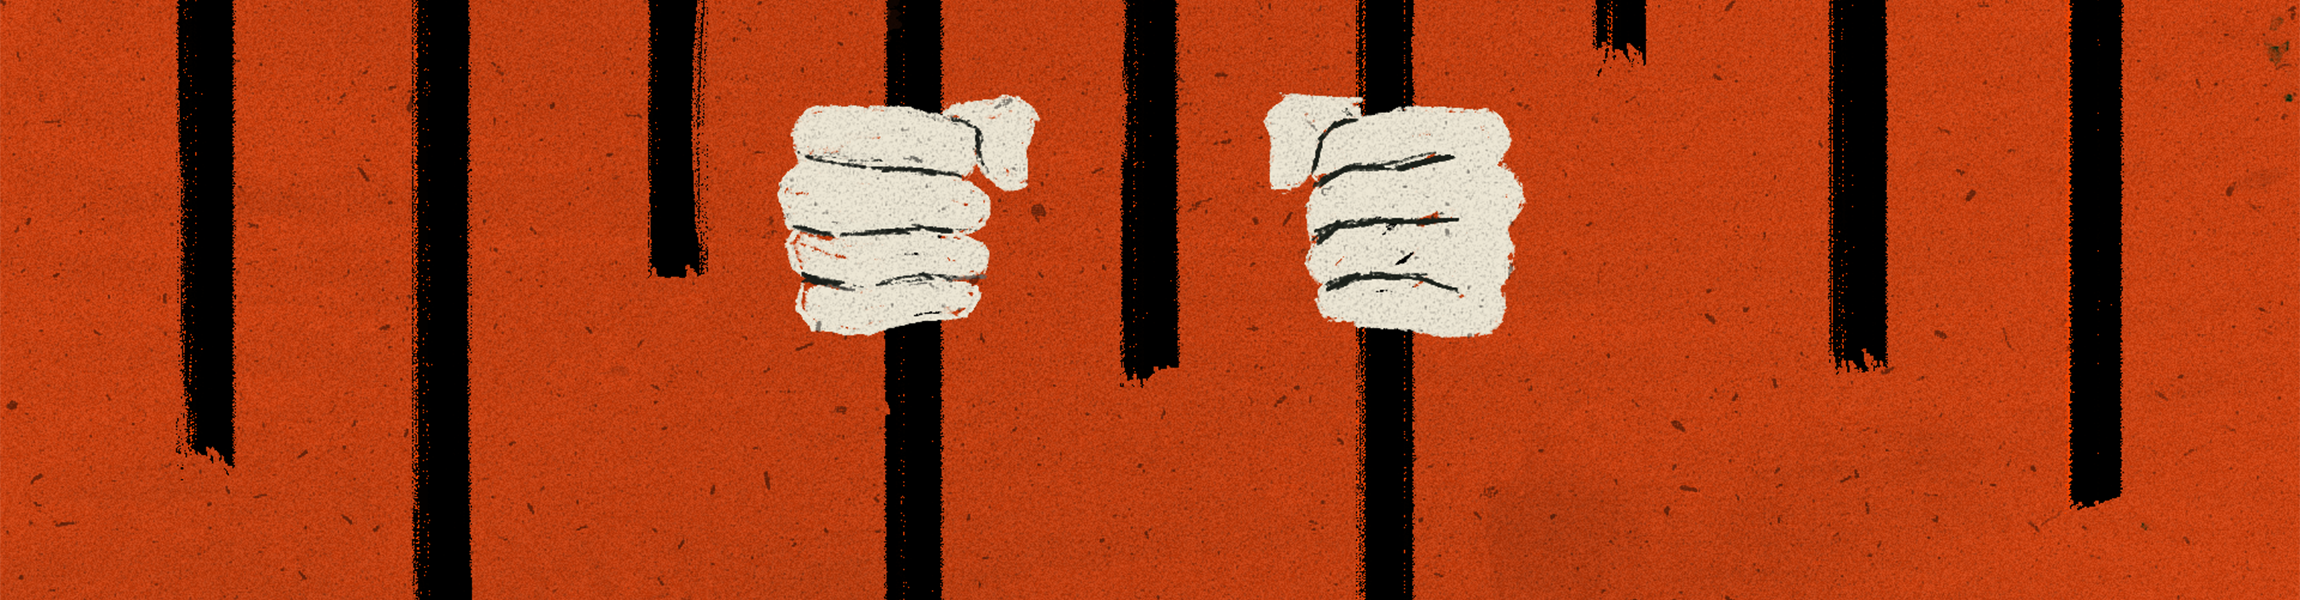 Minimalist illustration of hands gripping jail bars; some bars are drawn only part way down the screen to suggest that they are descending